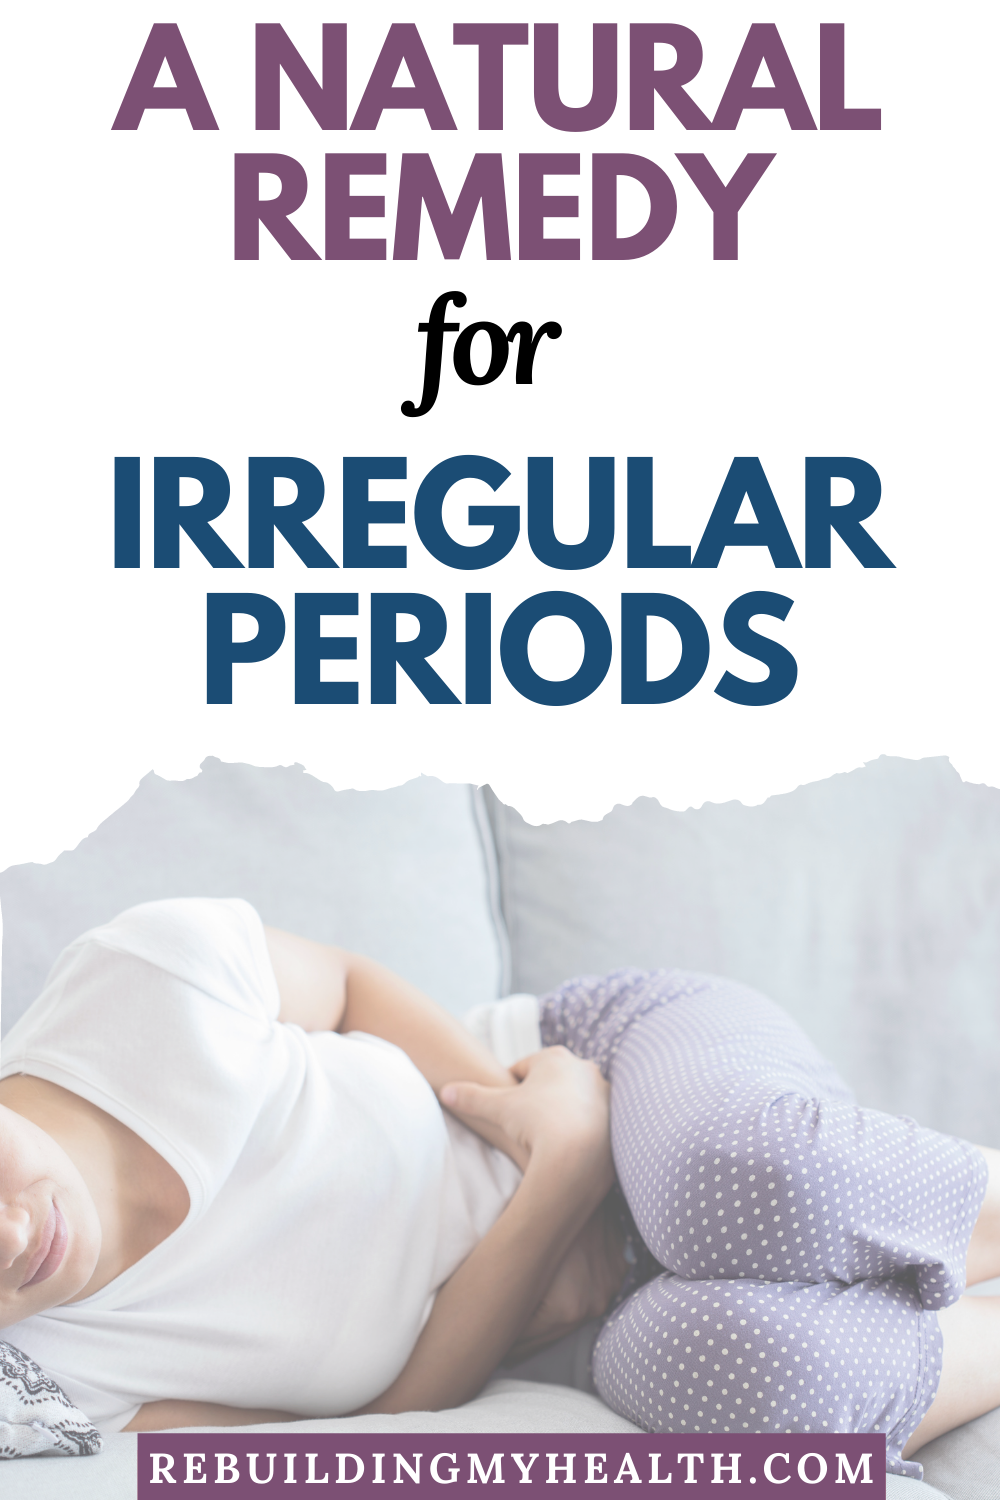 Learn about a natural remedy for irregular periods. Find out about chaste tree berry for irregular periods caused by low progesterone.